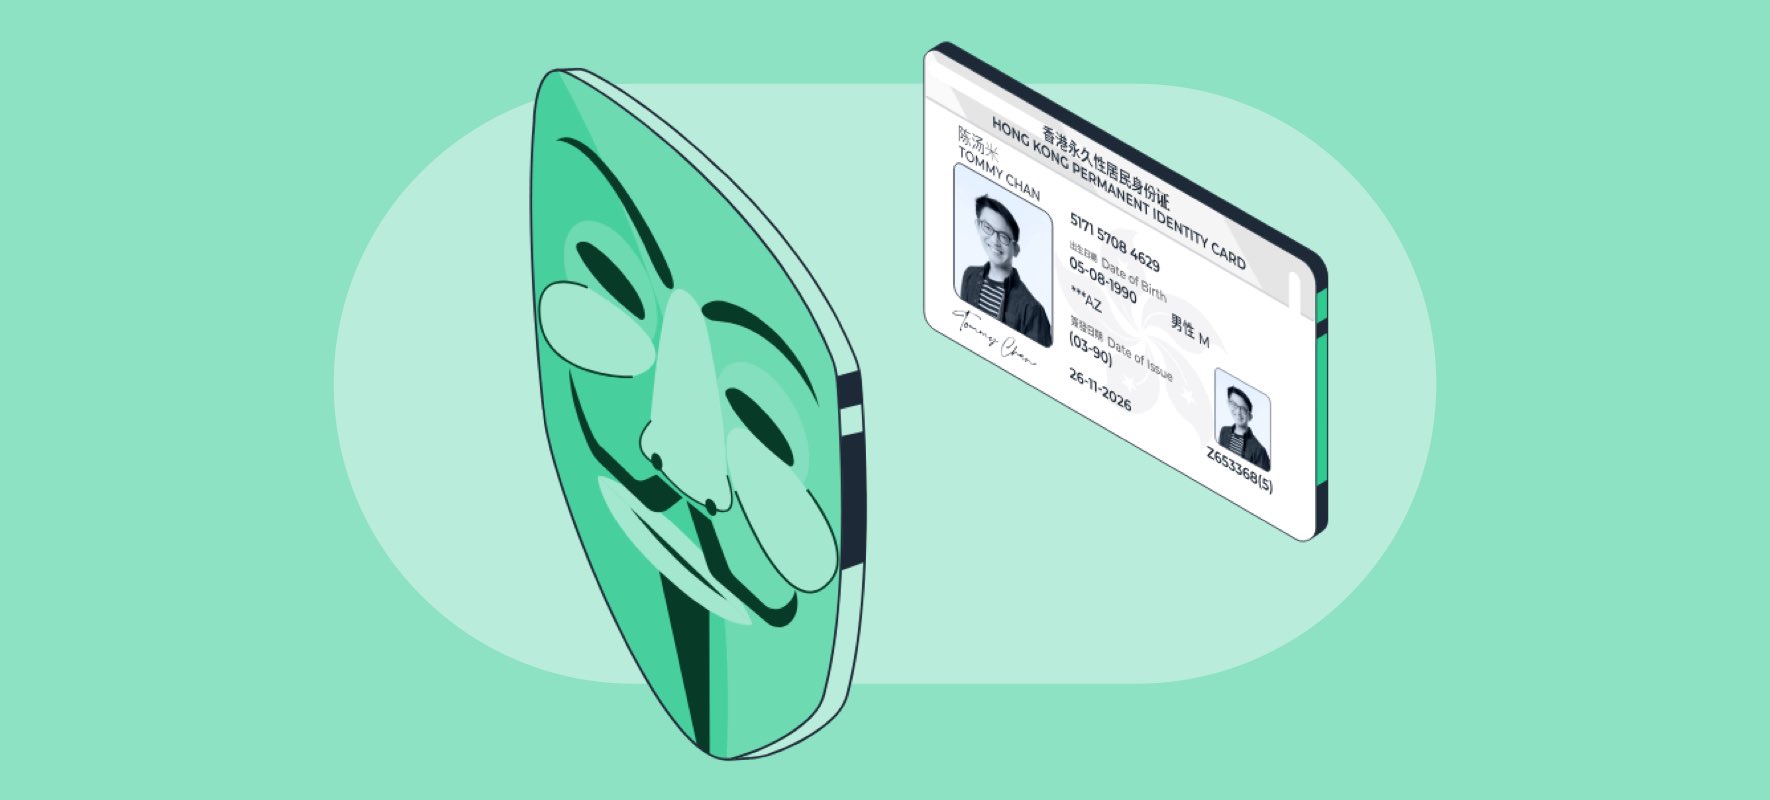 A mask with a Hong Kong Permanent Identity card image in the background: Depicting how reference checks by CheckMinistry can unveil the truth.